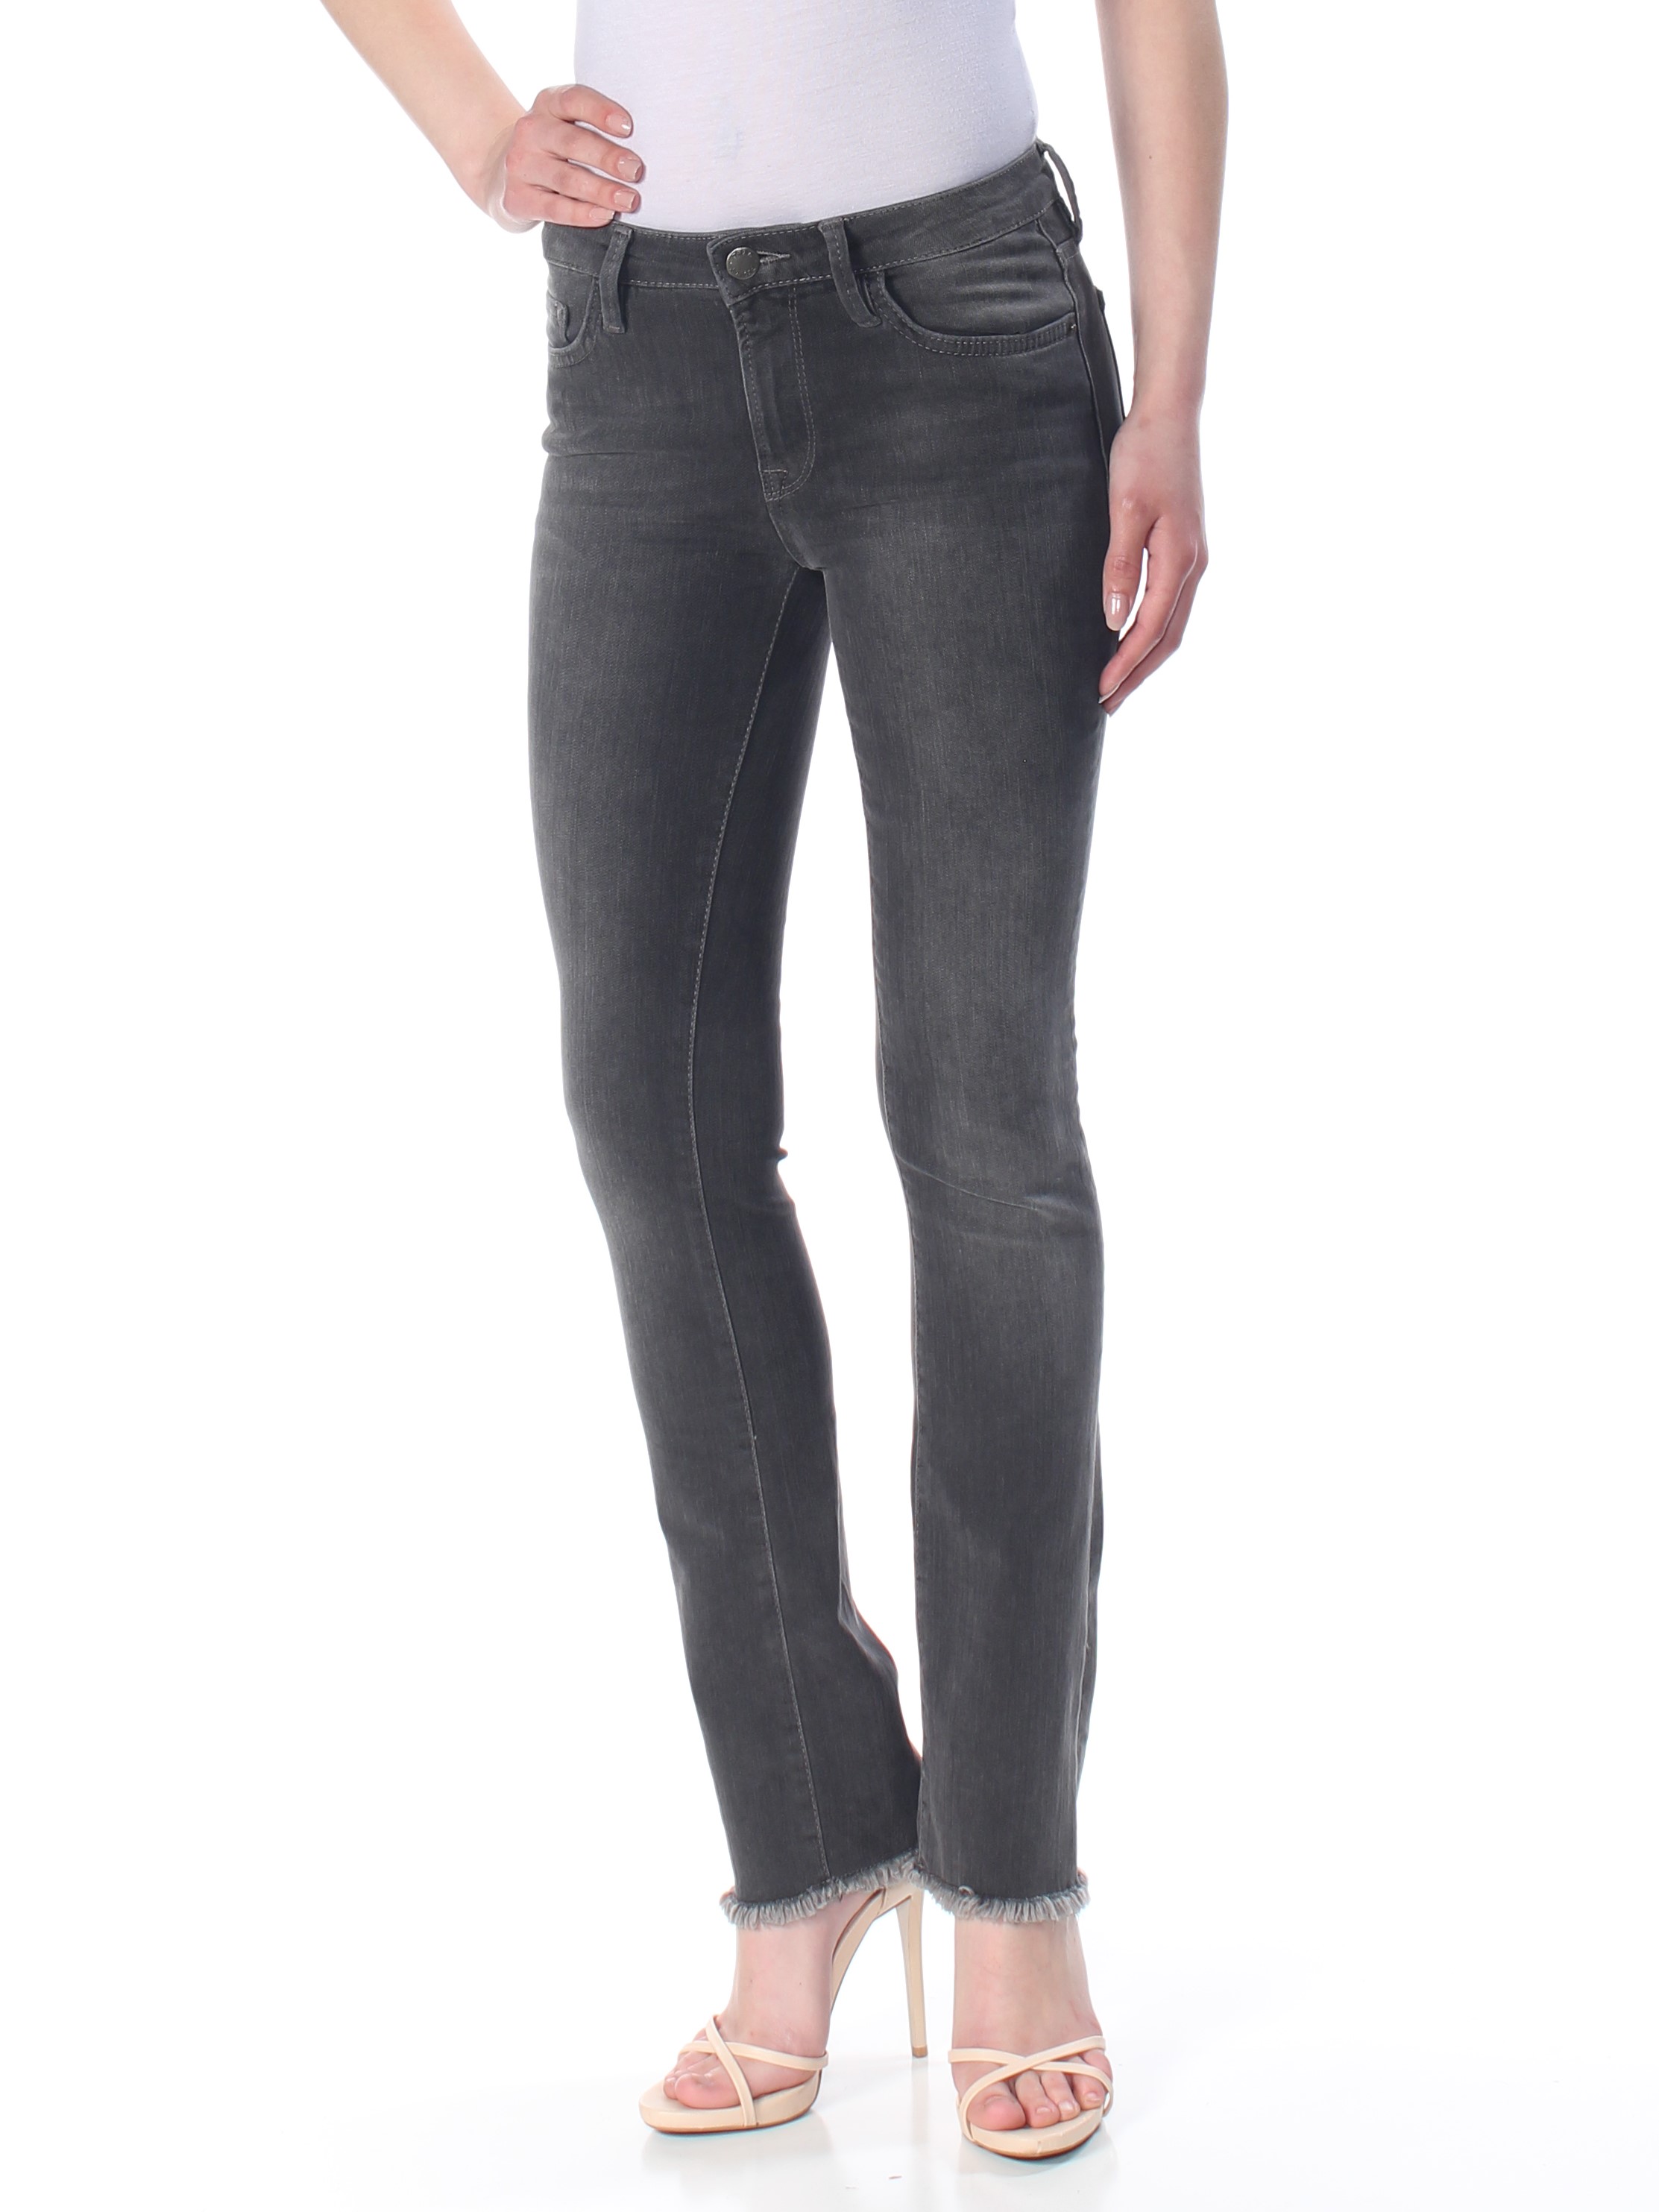 FREE PEOPLE $78 Womens New 1140 Black Zippered Pocketed Jeans 27 Waist B+B - image 3 of 4